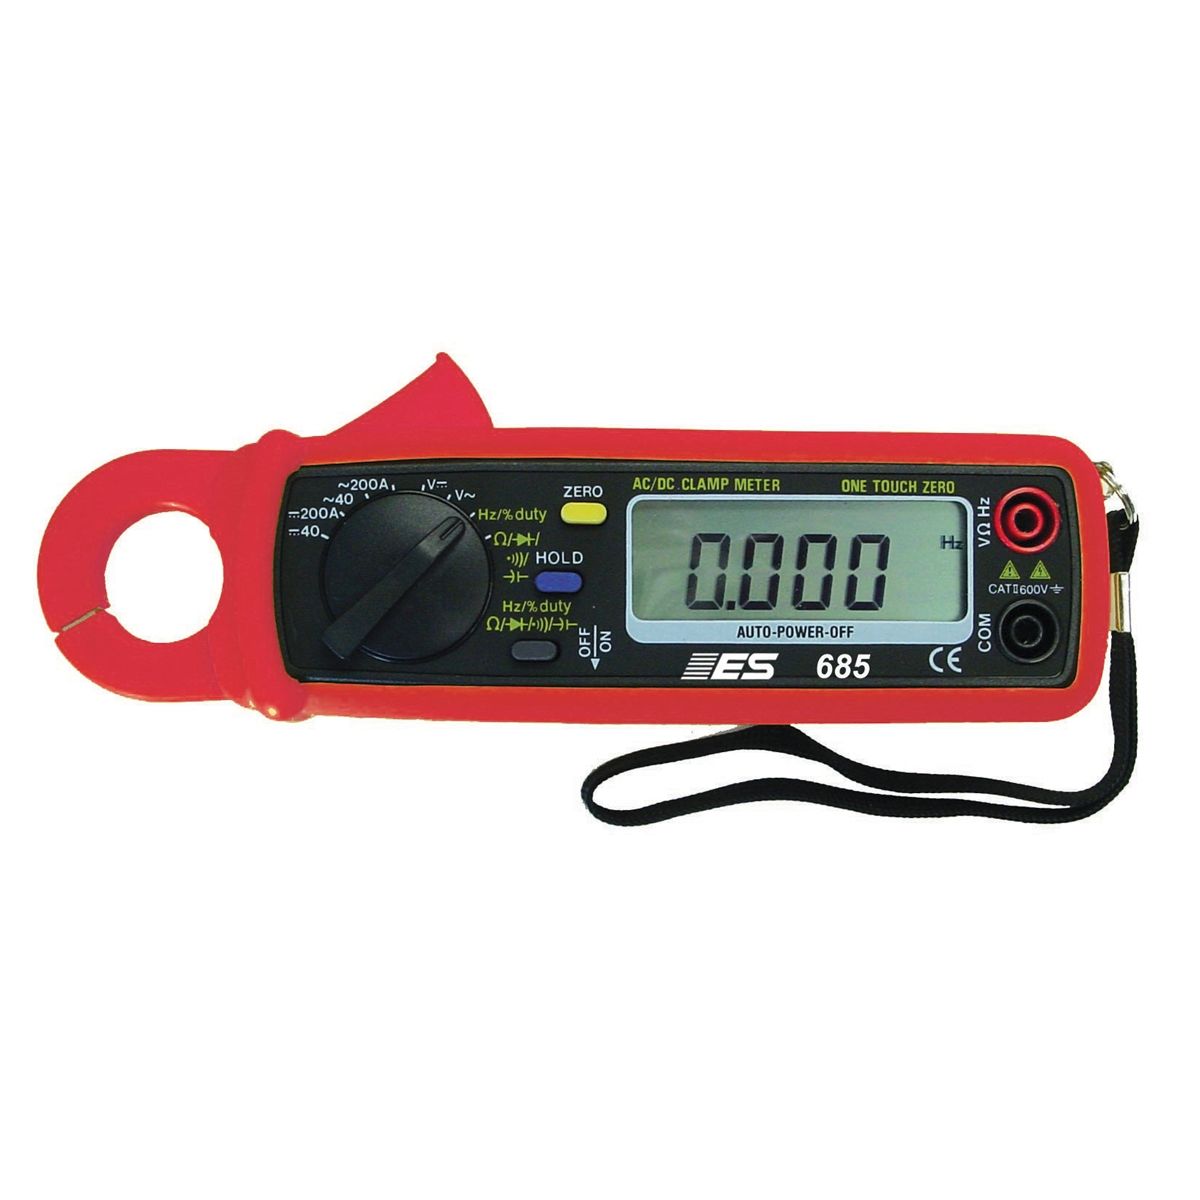 Test Battery Amps With Multimeter - Measuring ampere of AA battery